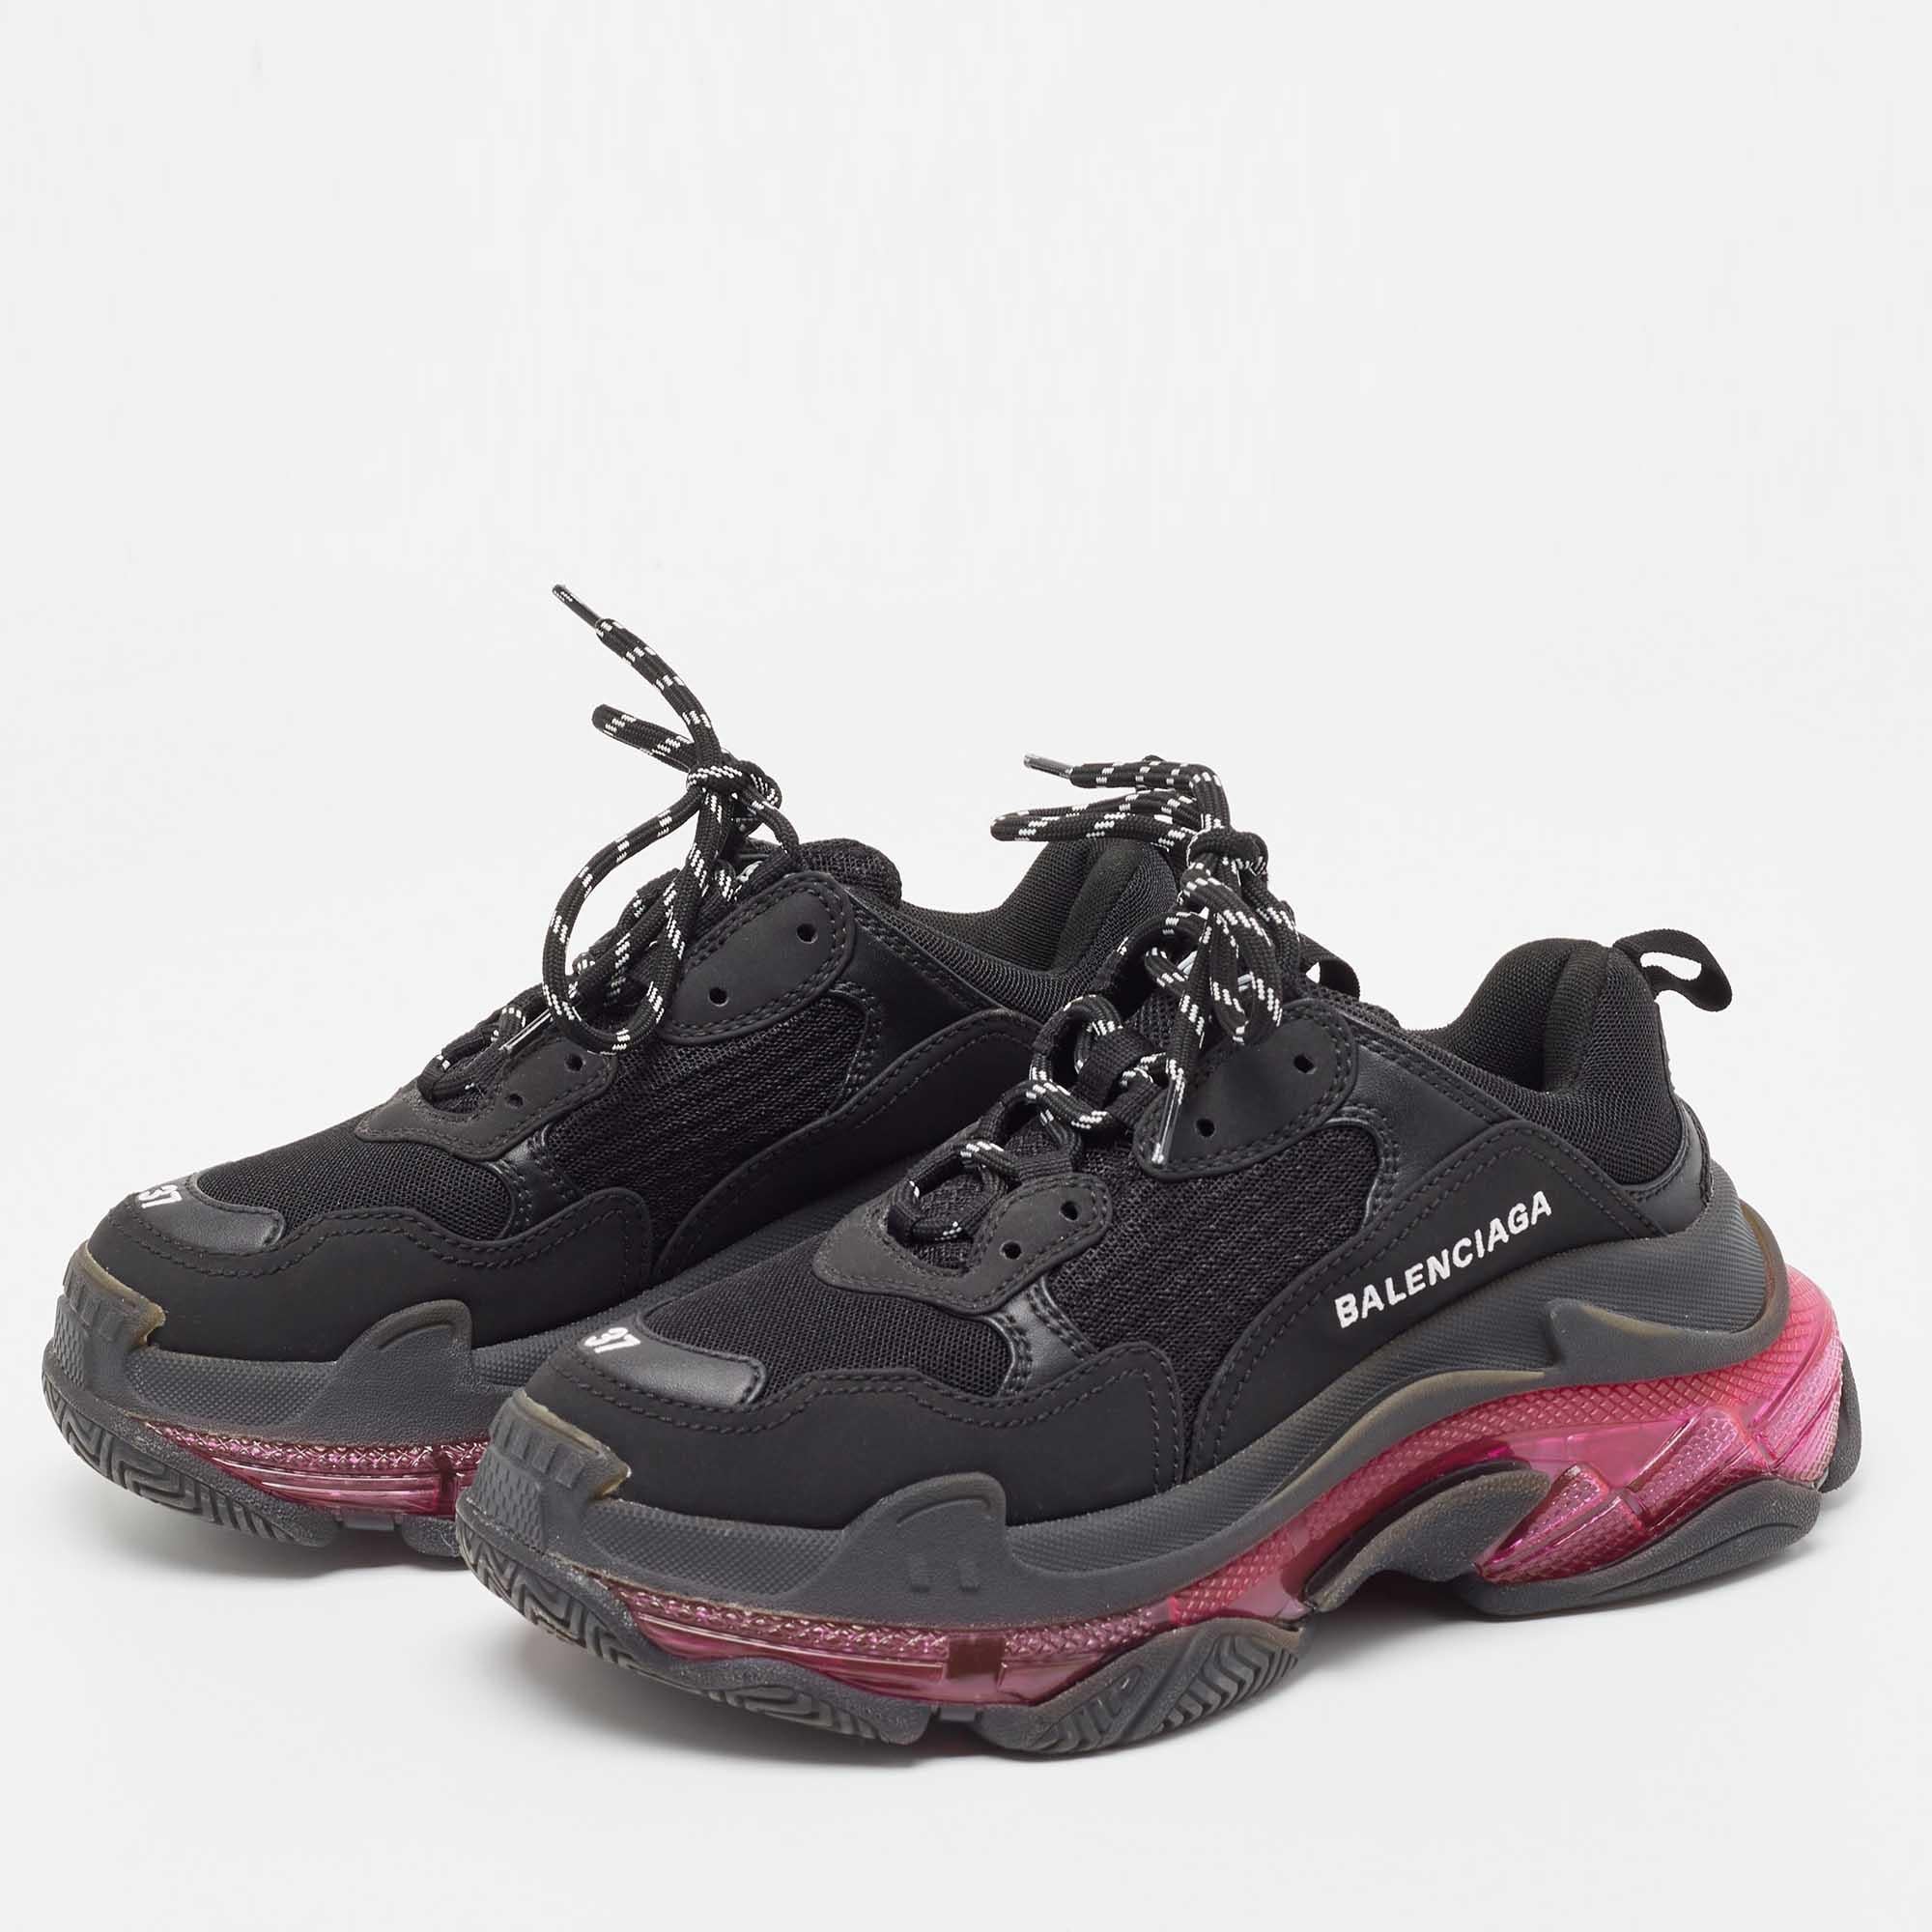 Balenciaga Black Leather and Mesh Triple S Clear Sneakers Size 37 4